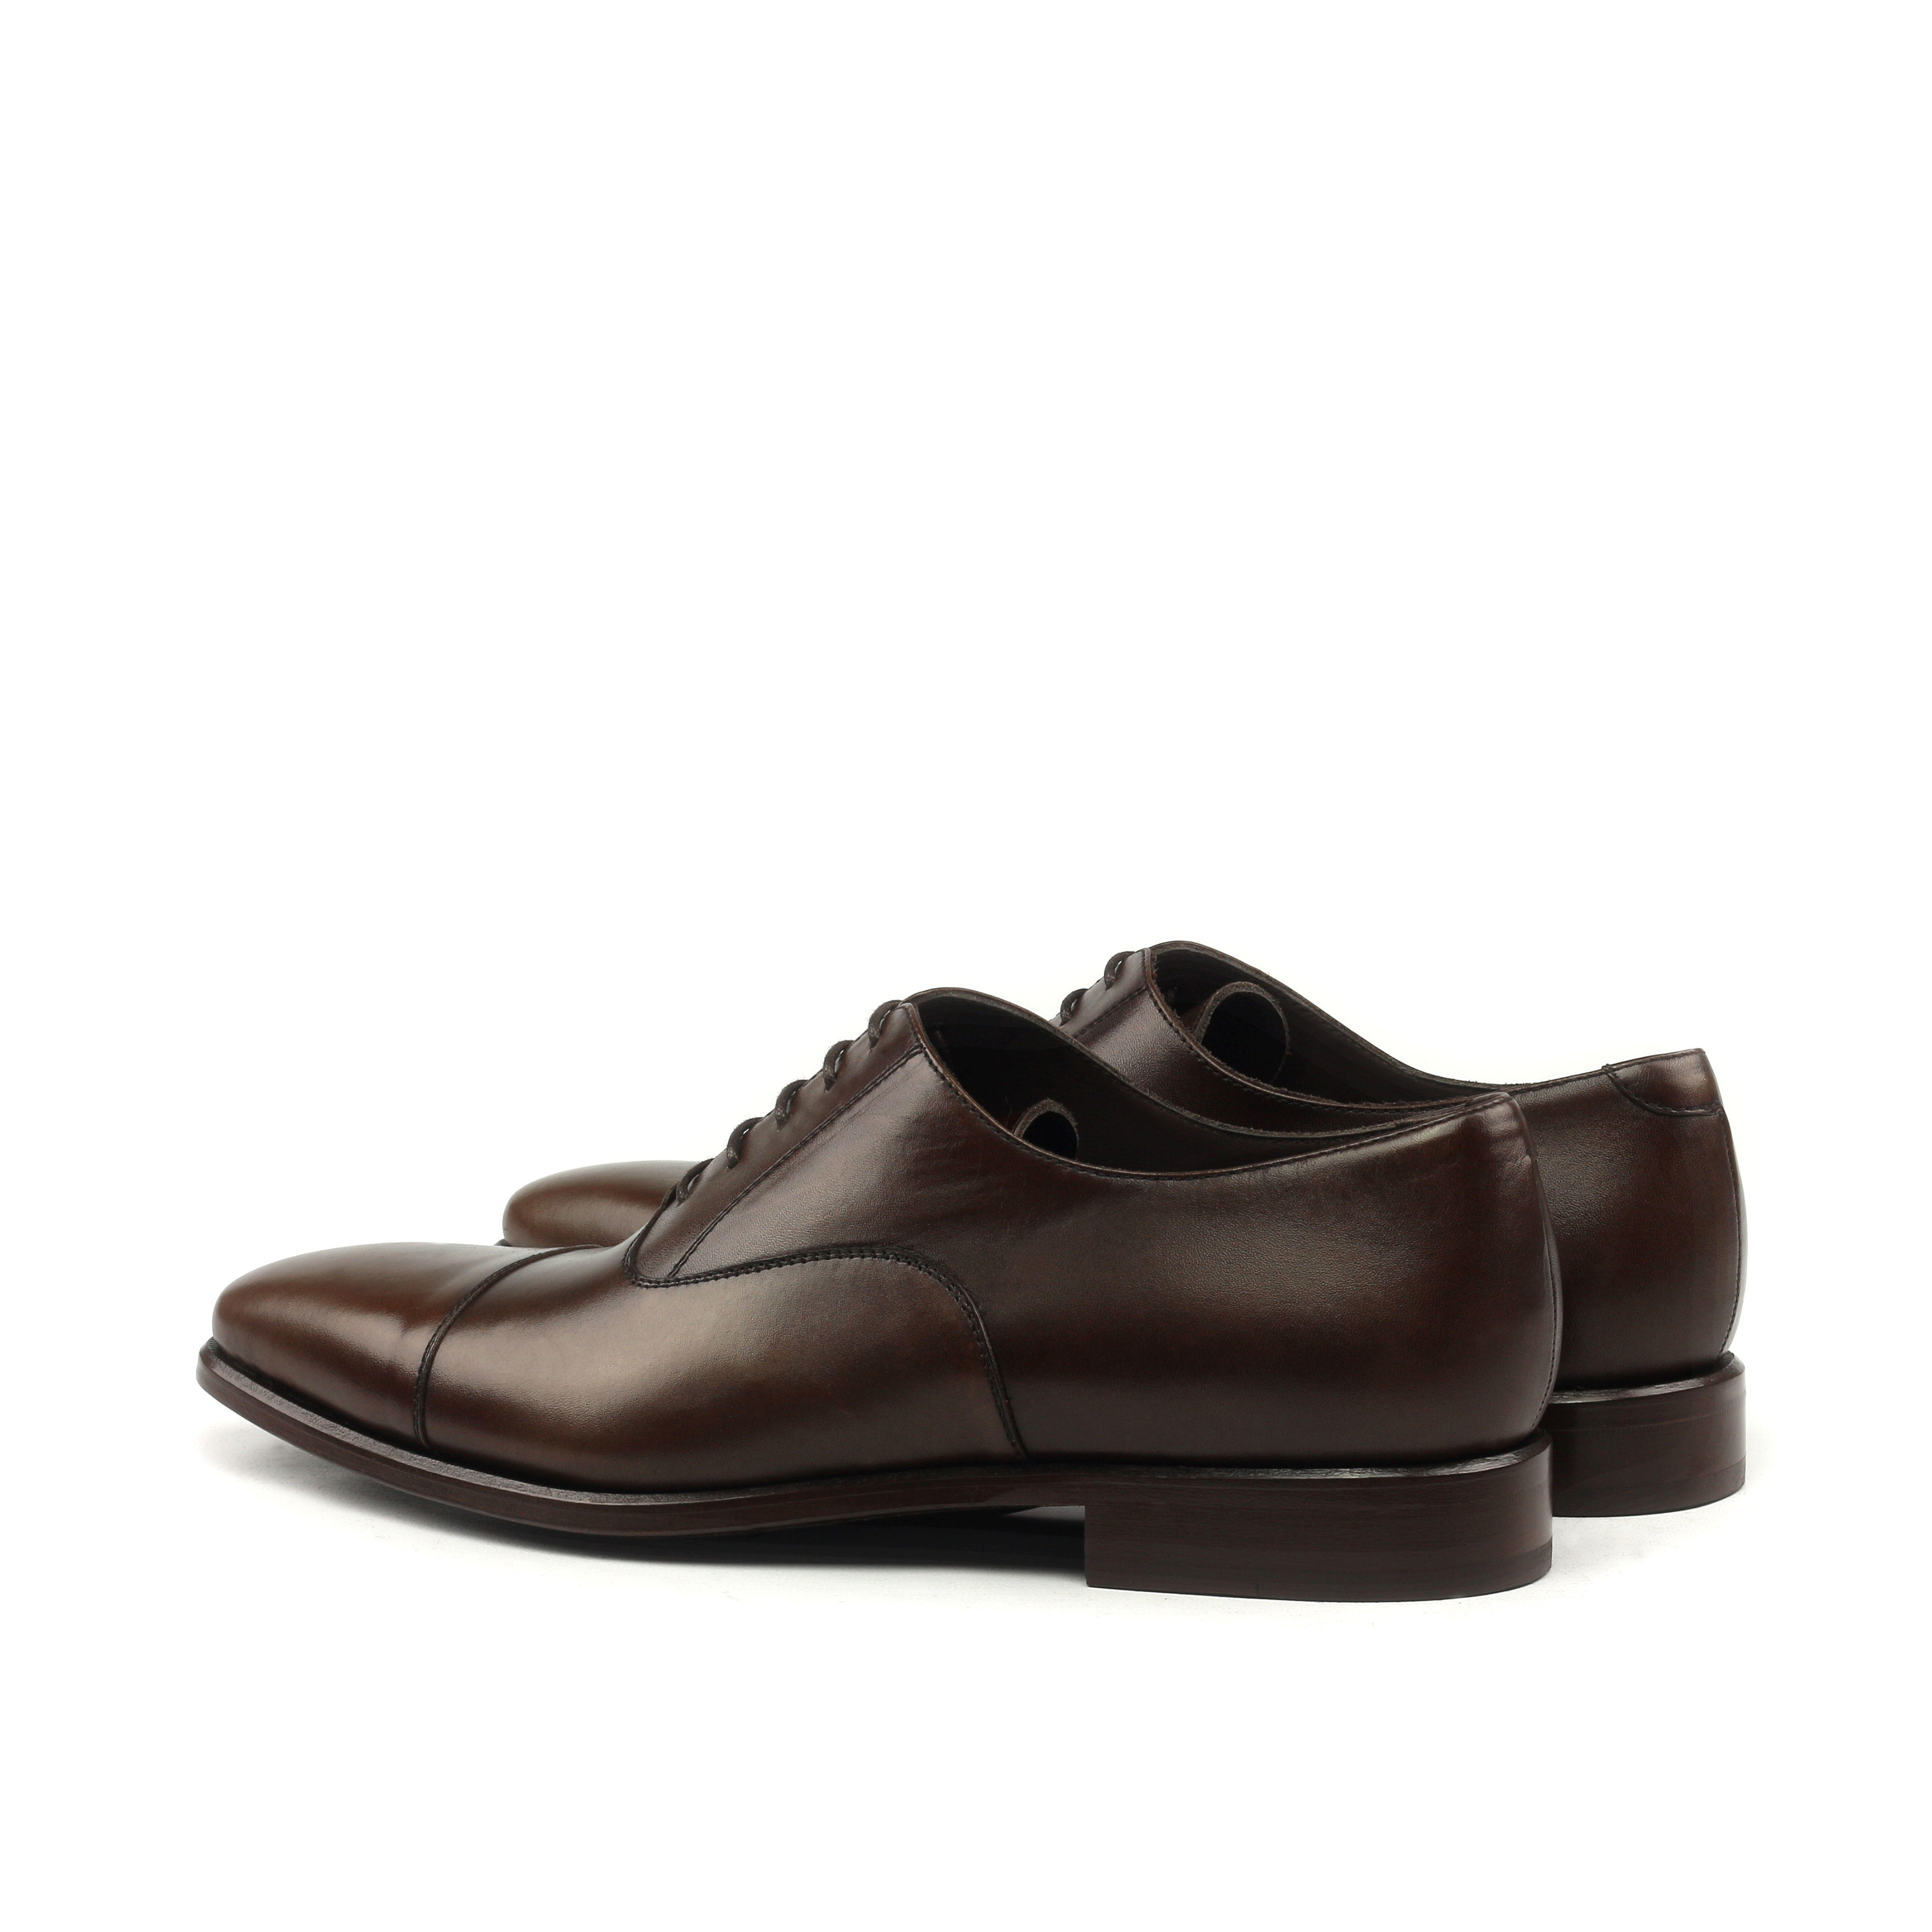 MANOR OF LONDON 'The Oxford' Brown Painted Calfskin Shoe Luxury Custom Initials Monogrammed Back Side View